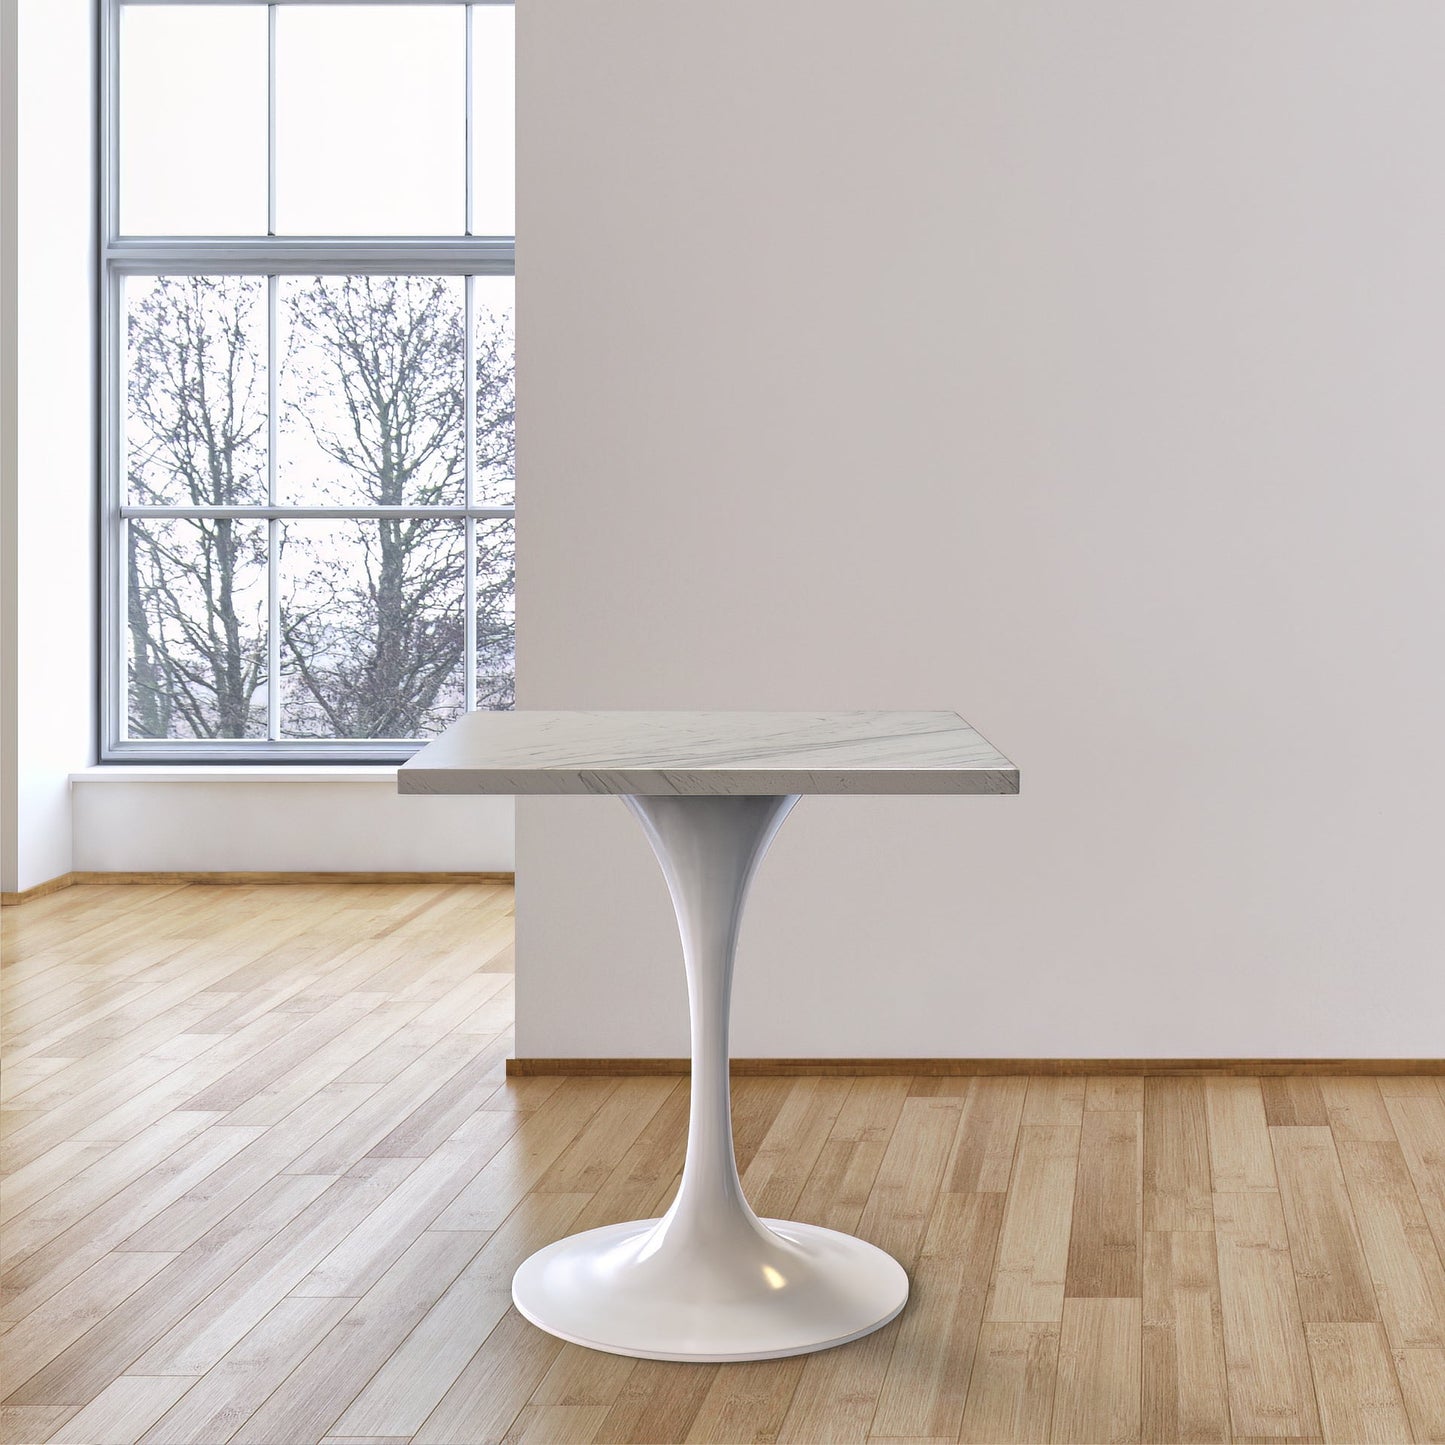 Vera 36" Square Dining Table - White Base Marbleized Top